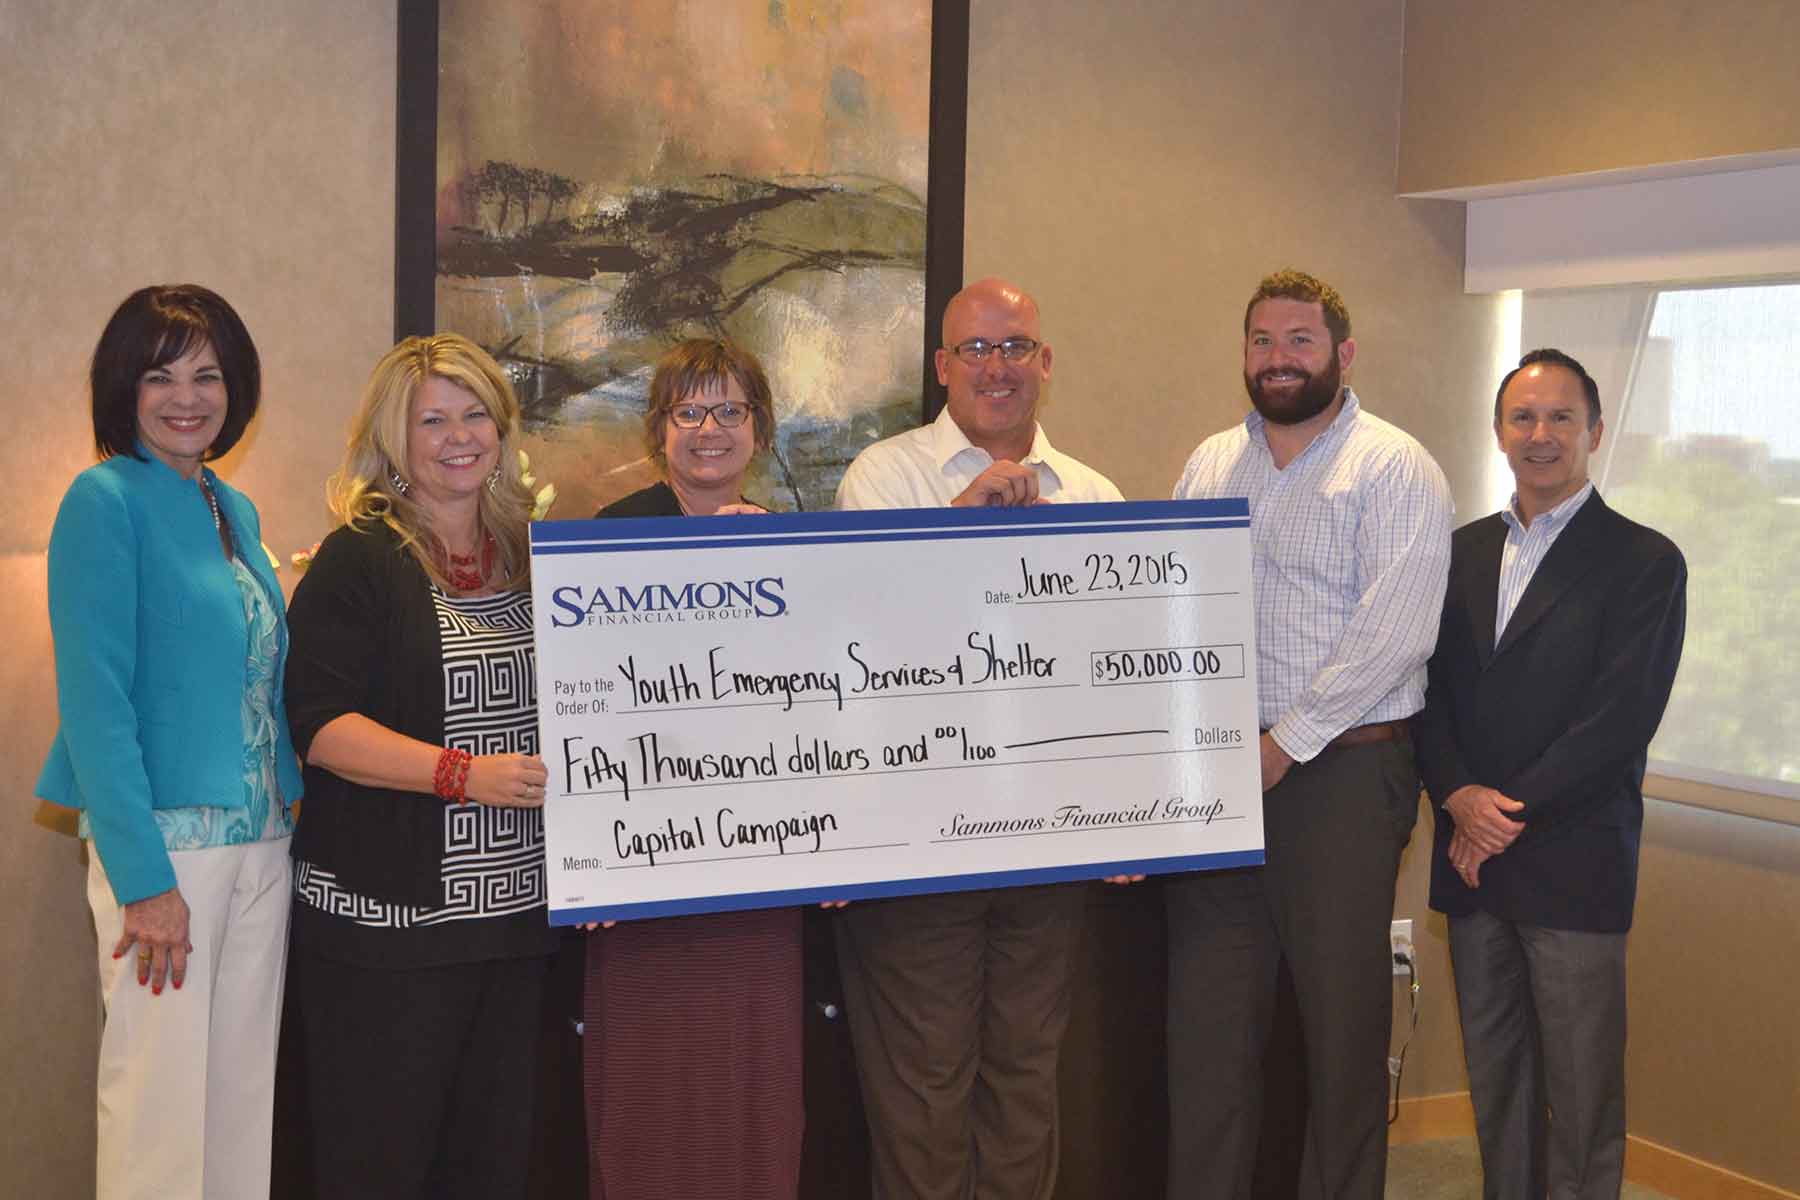 Sammons Financial Group presents a $50,000 check to Youth Emergency Services & Shelter's (YESS) Shelter Expansion Project.